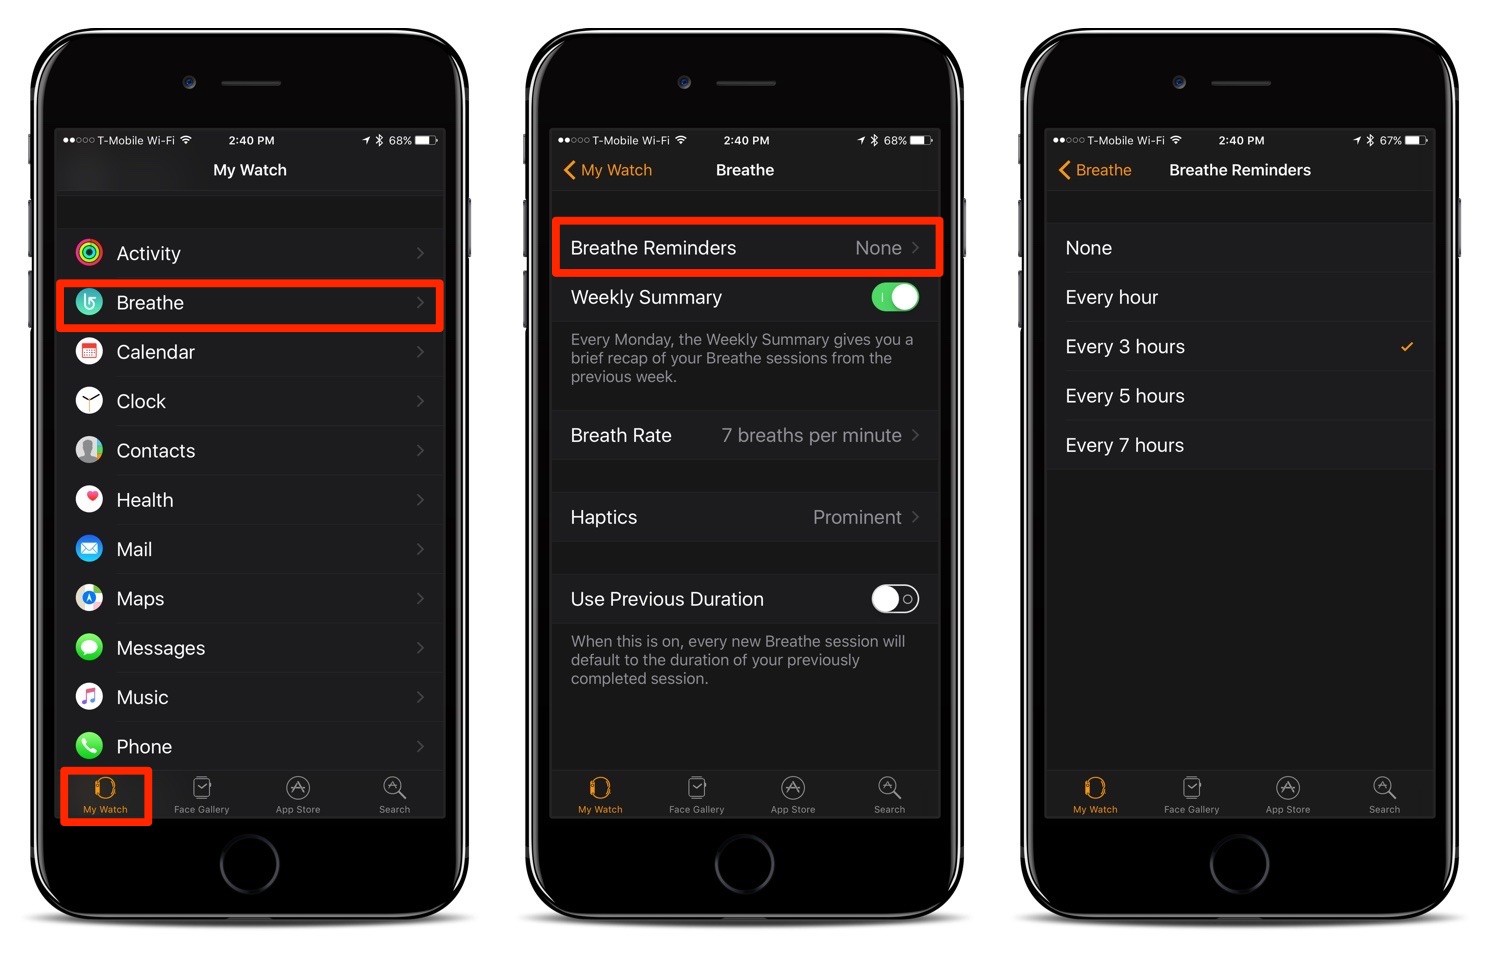 How To Turn Off or Adjust the 'Breathe' Reminders on Your Apple Watch